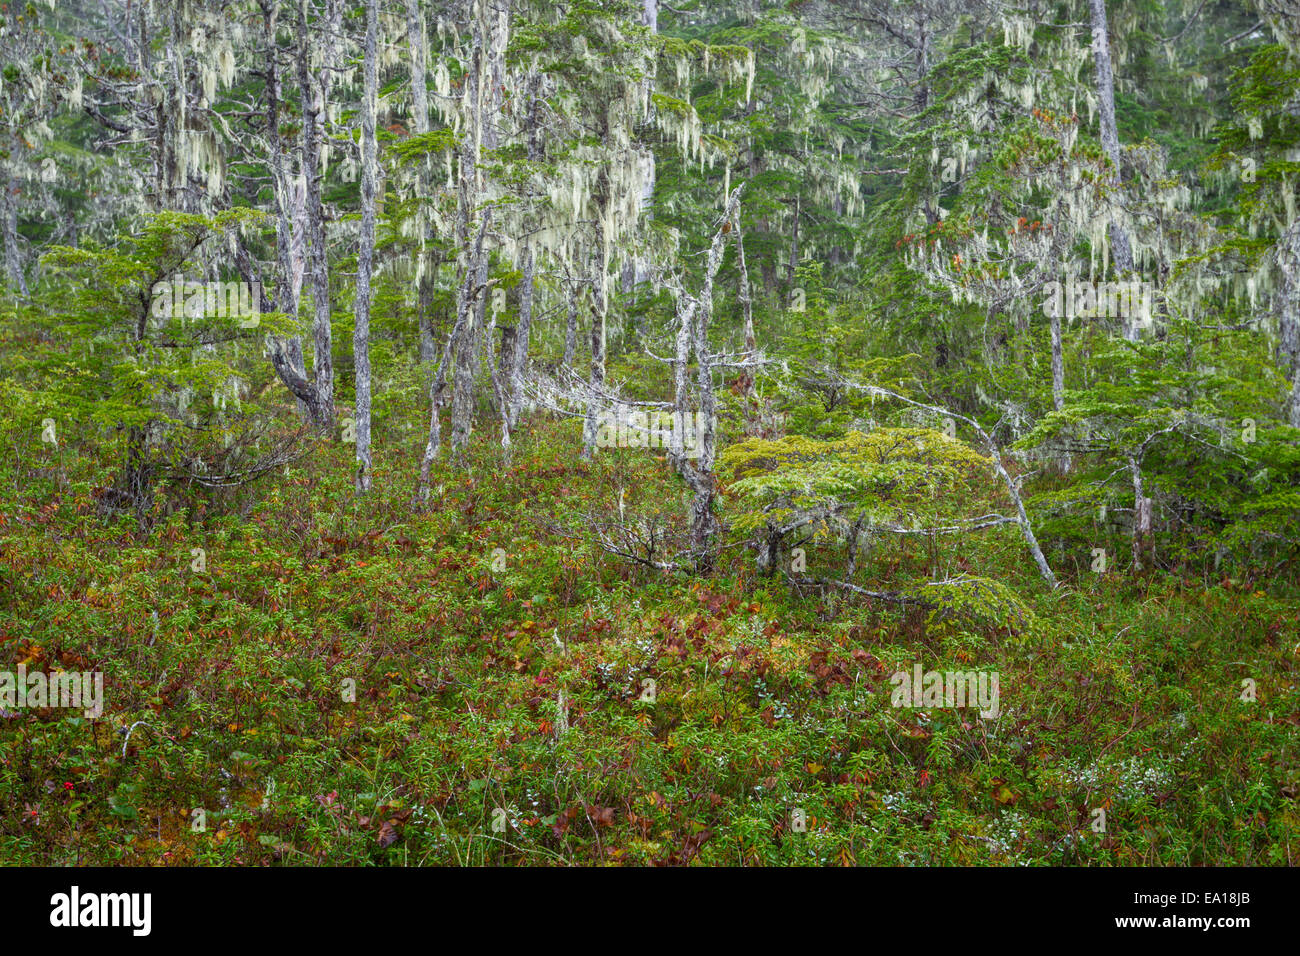 Low growing shrubs and small stands of stunted trees adorned with arboreal lichens in muskeg, Tongass National Forest, Alaska Stock Photo